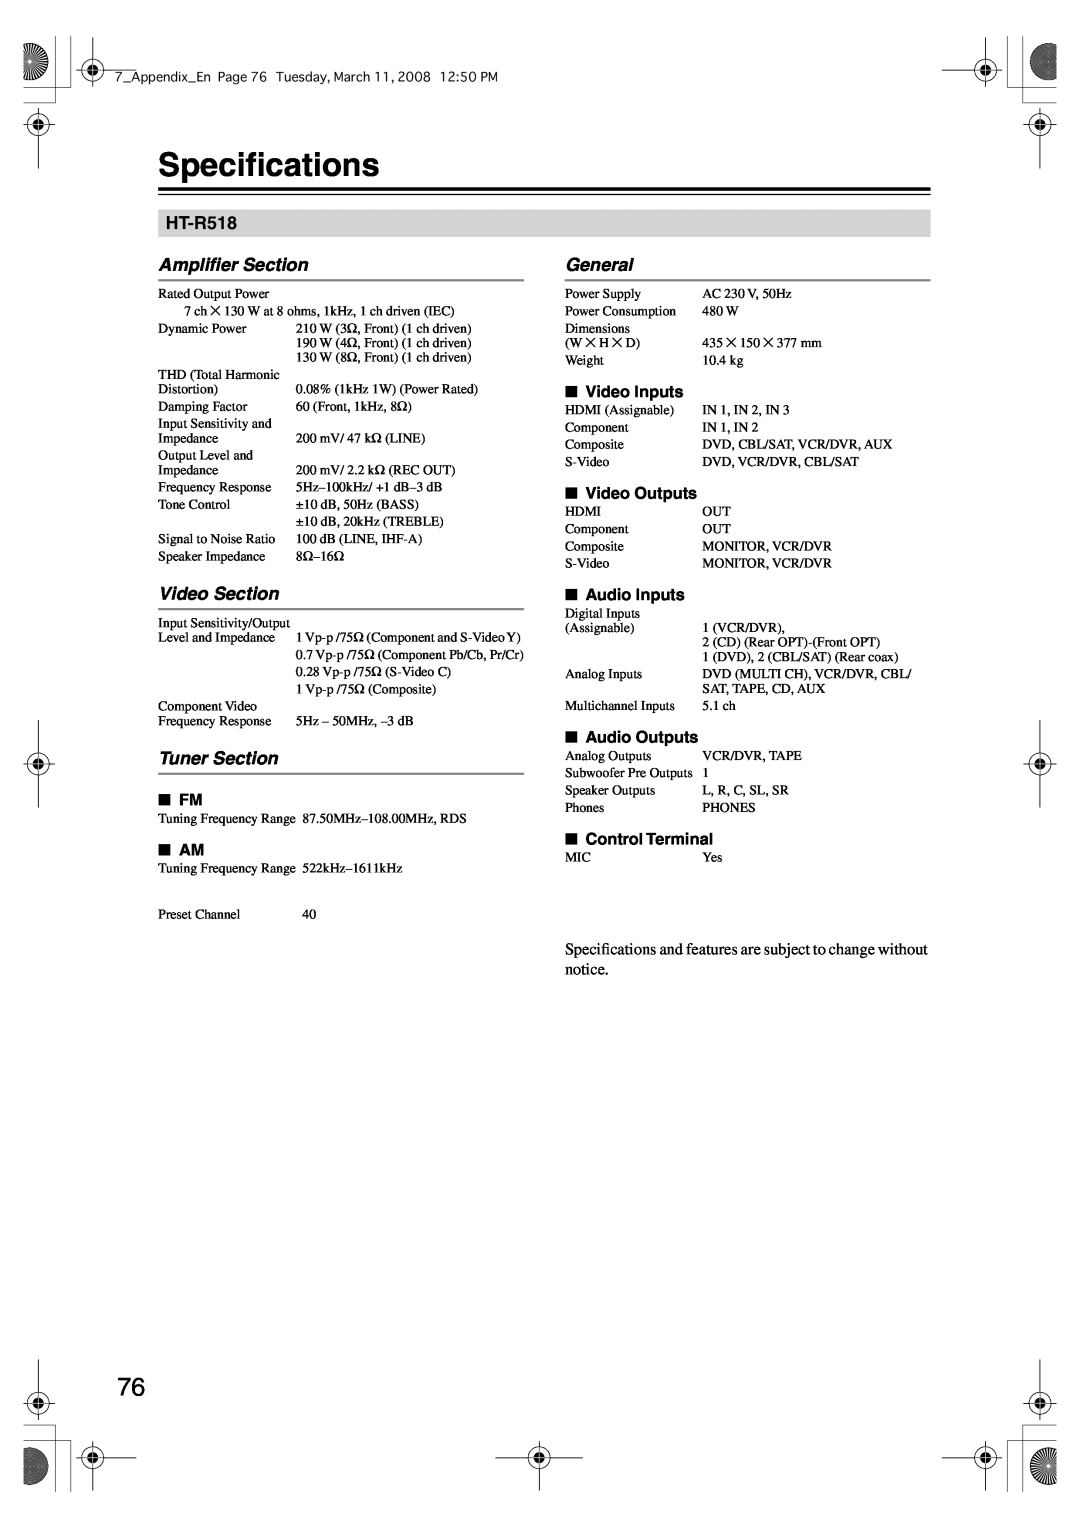 Onkyo HT-R518 instruction manual Speciﬁcations, Ampliﬁer Section, General, Video Section, Tuner Section 